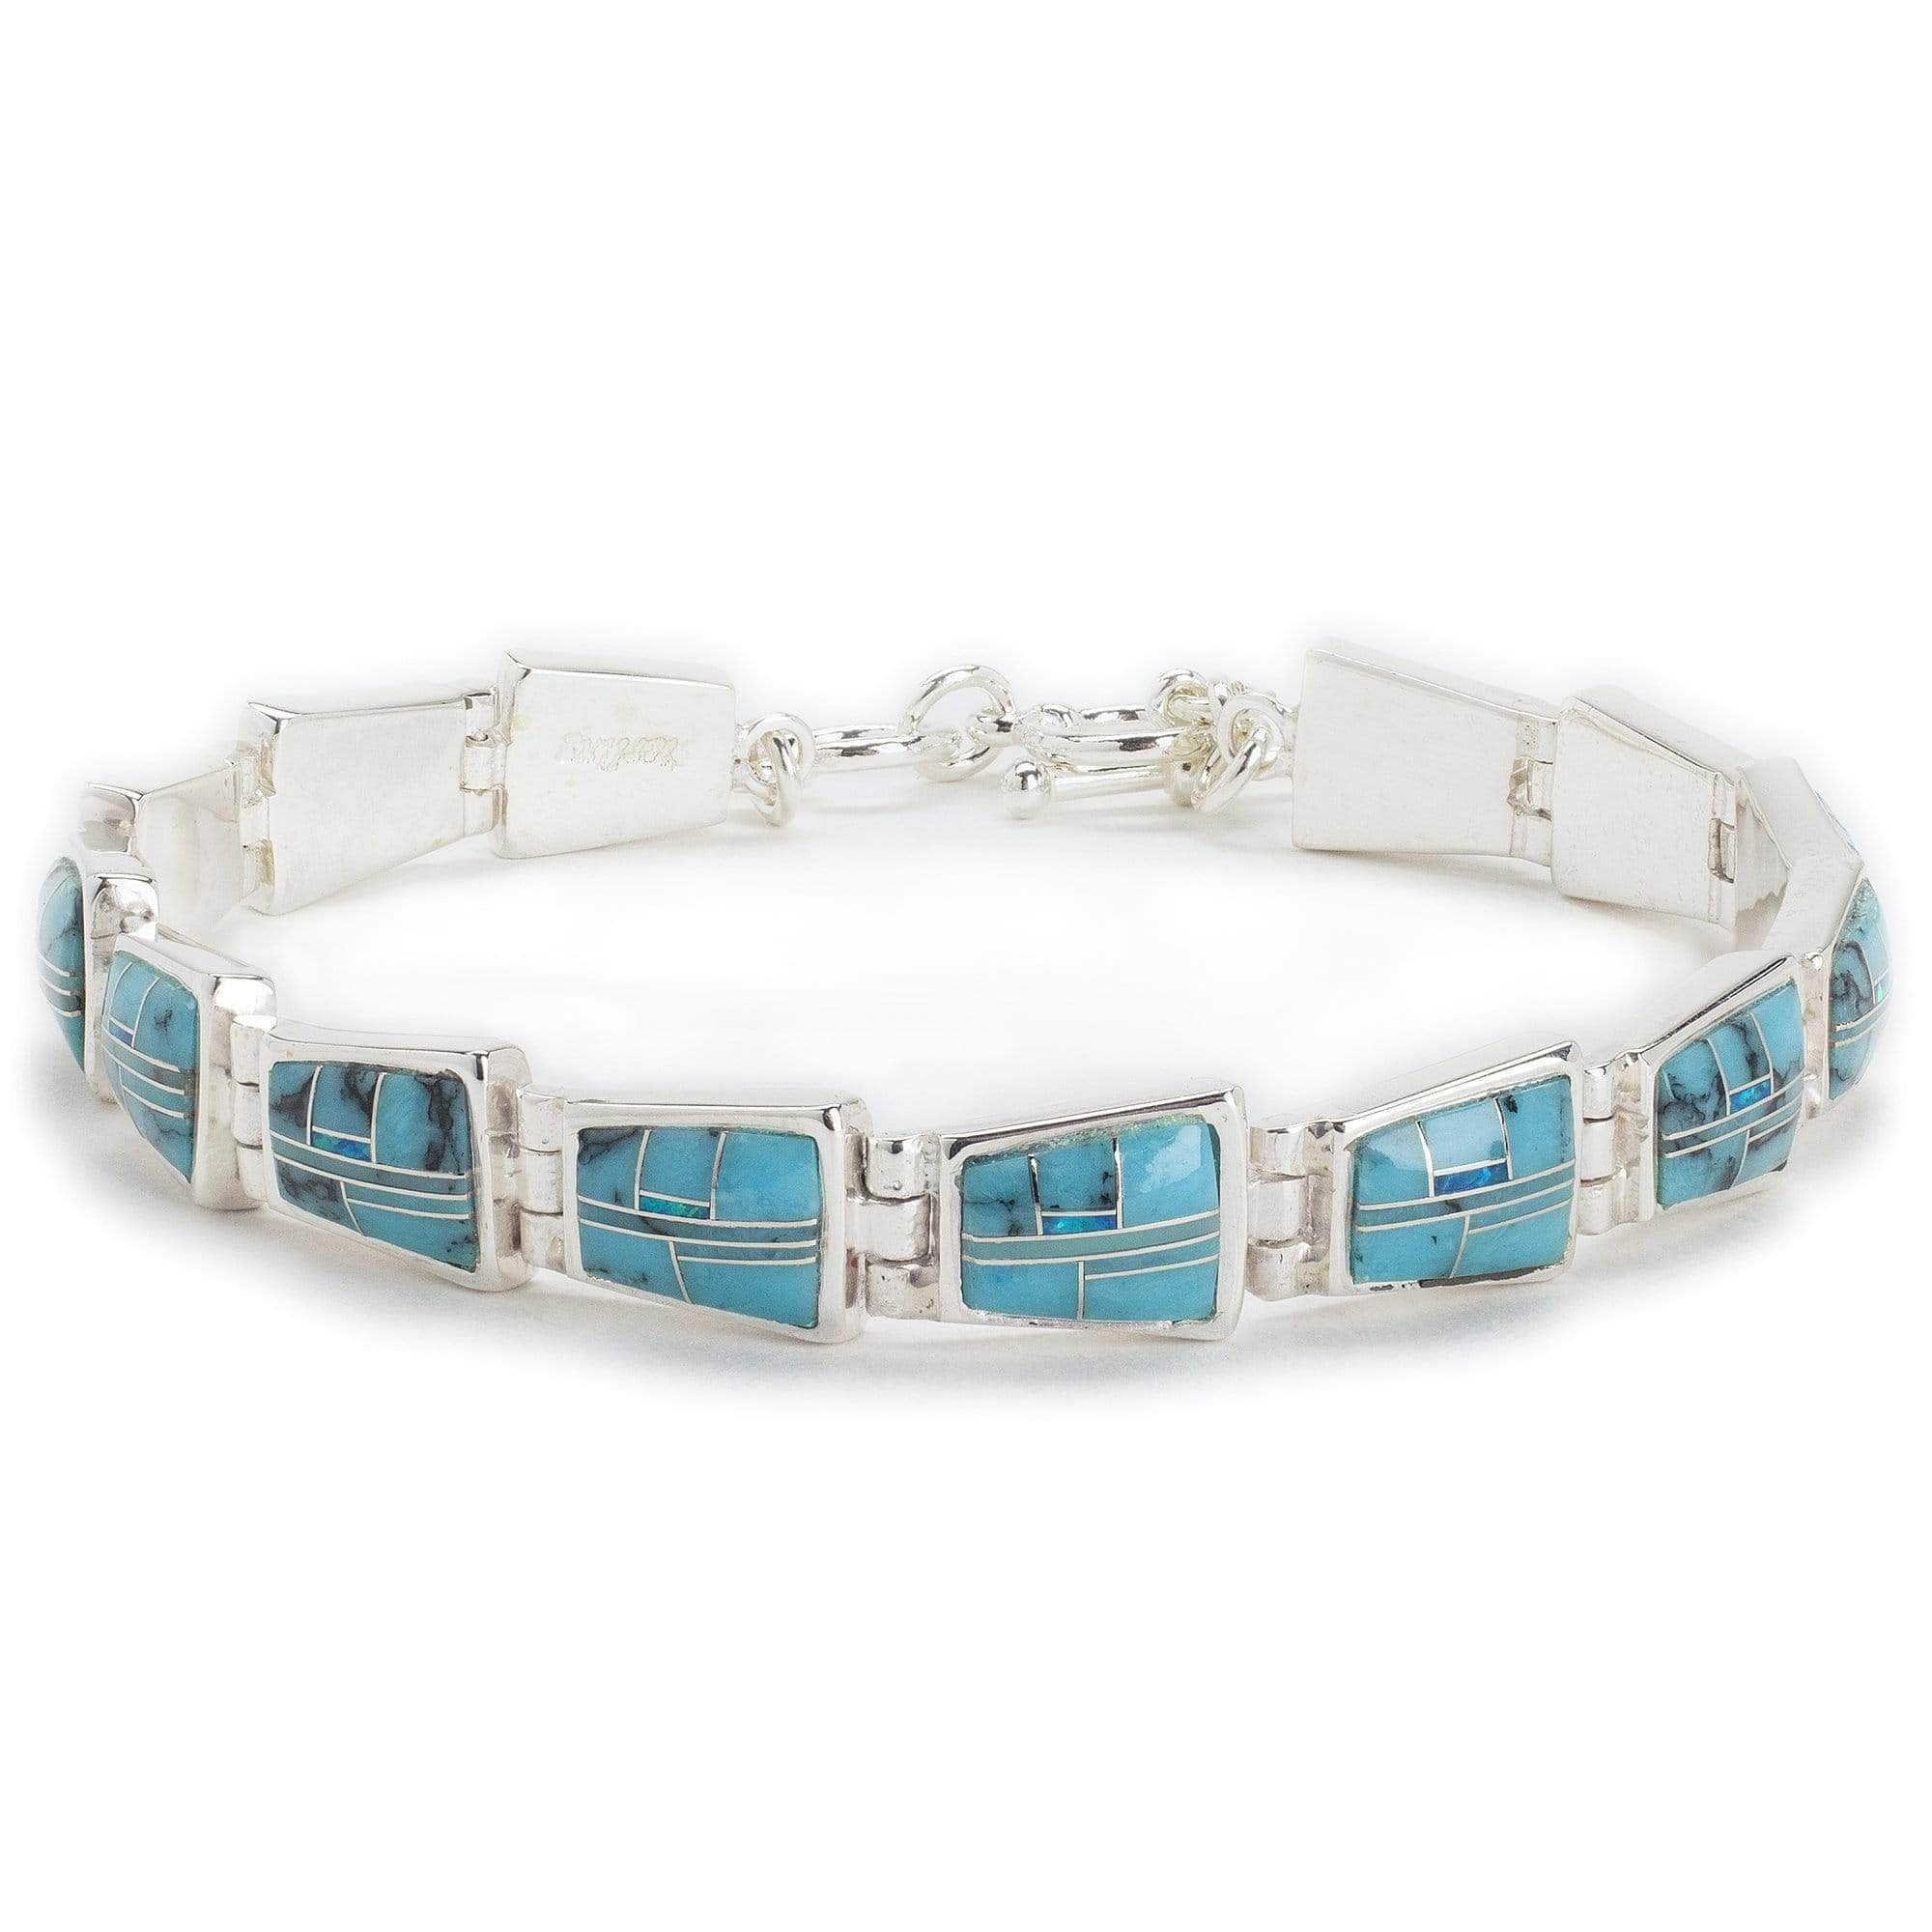 Kalifano Southwest Silver Jewelry Turquoise 925 Sterling Silver Bracelet USA Handmade with Opal Accent NMB.0240.TQ